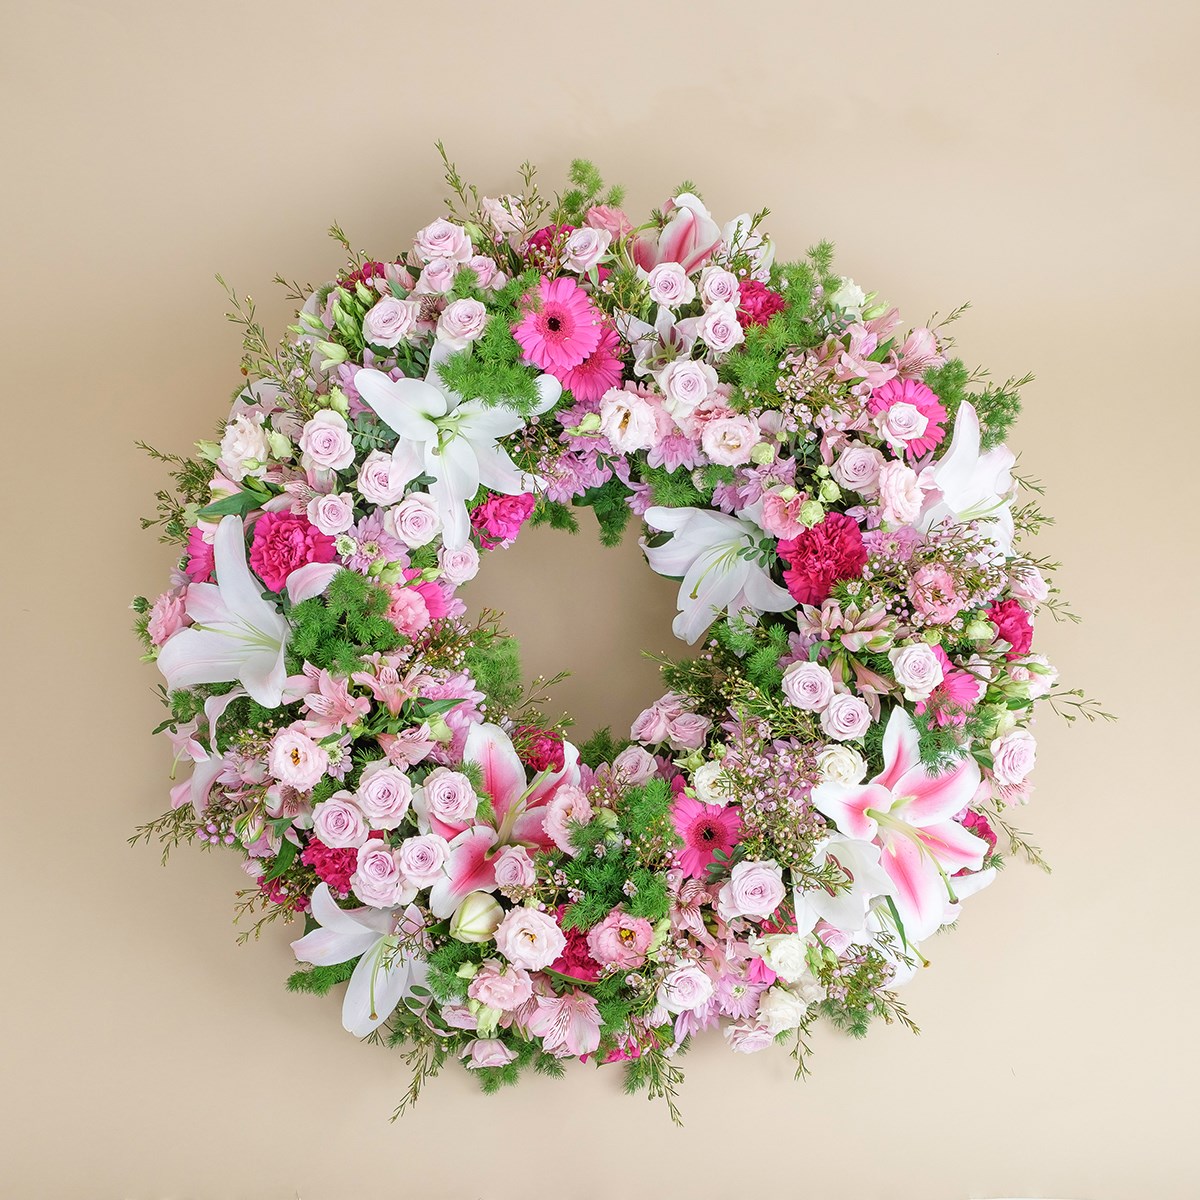 Small premium funeral wreath in shades of pink